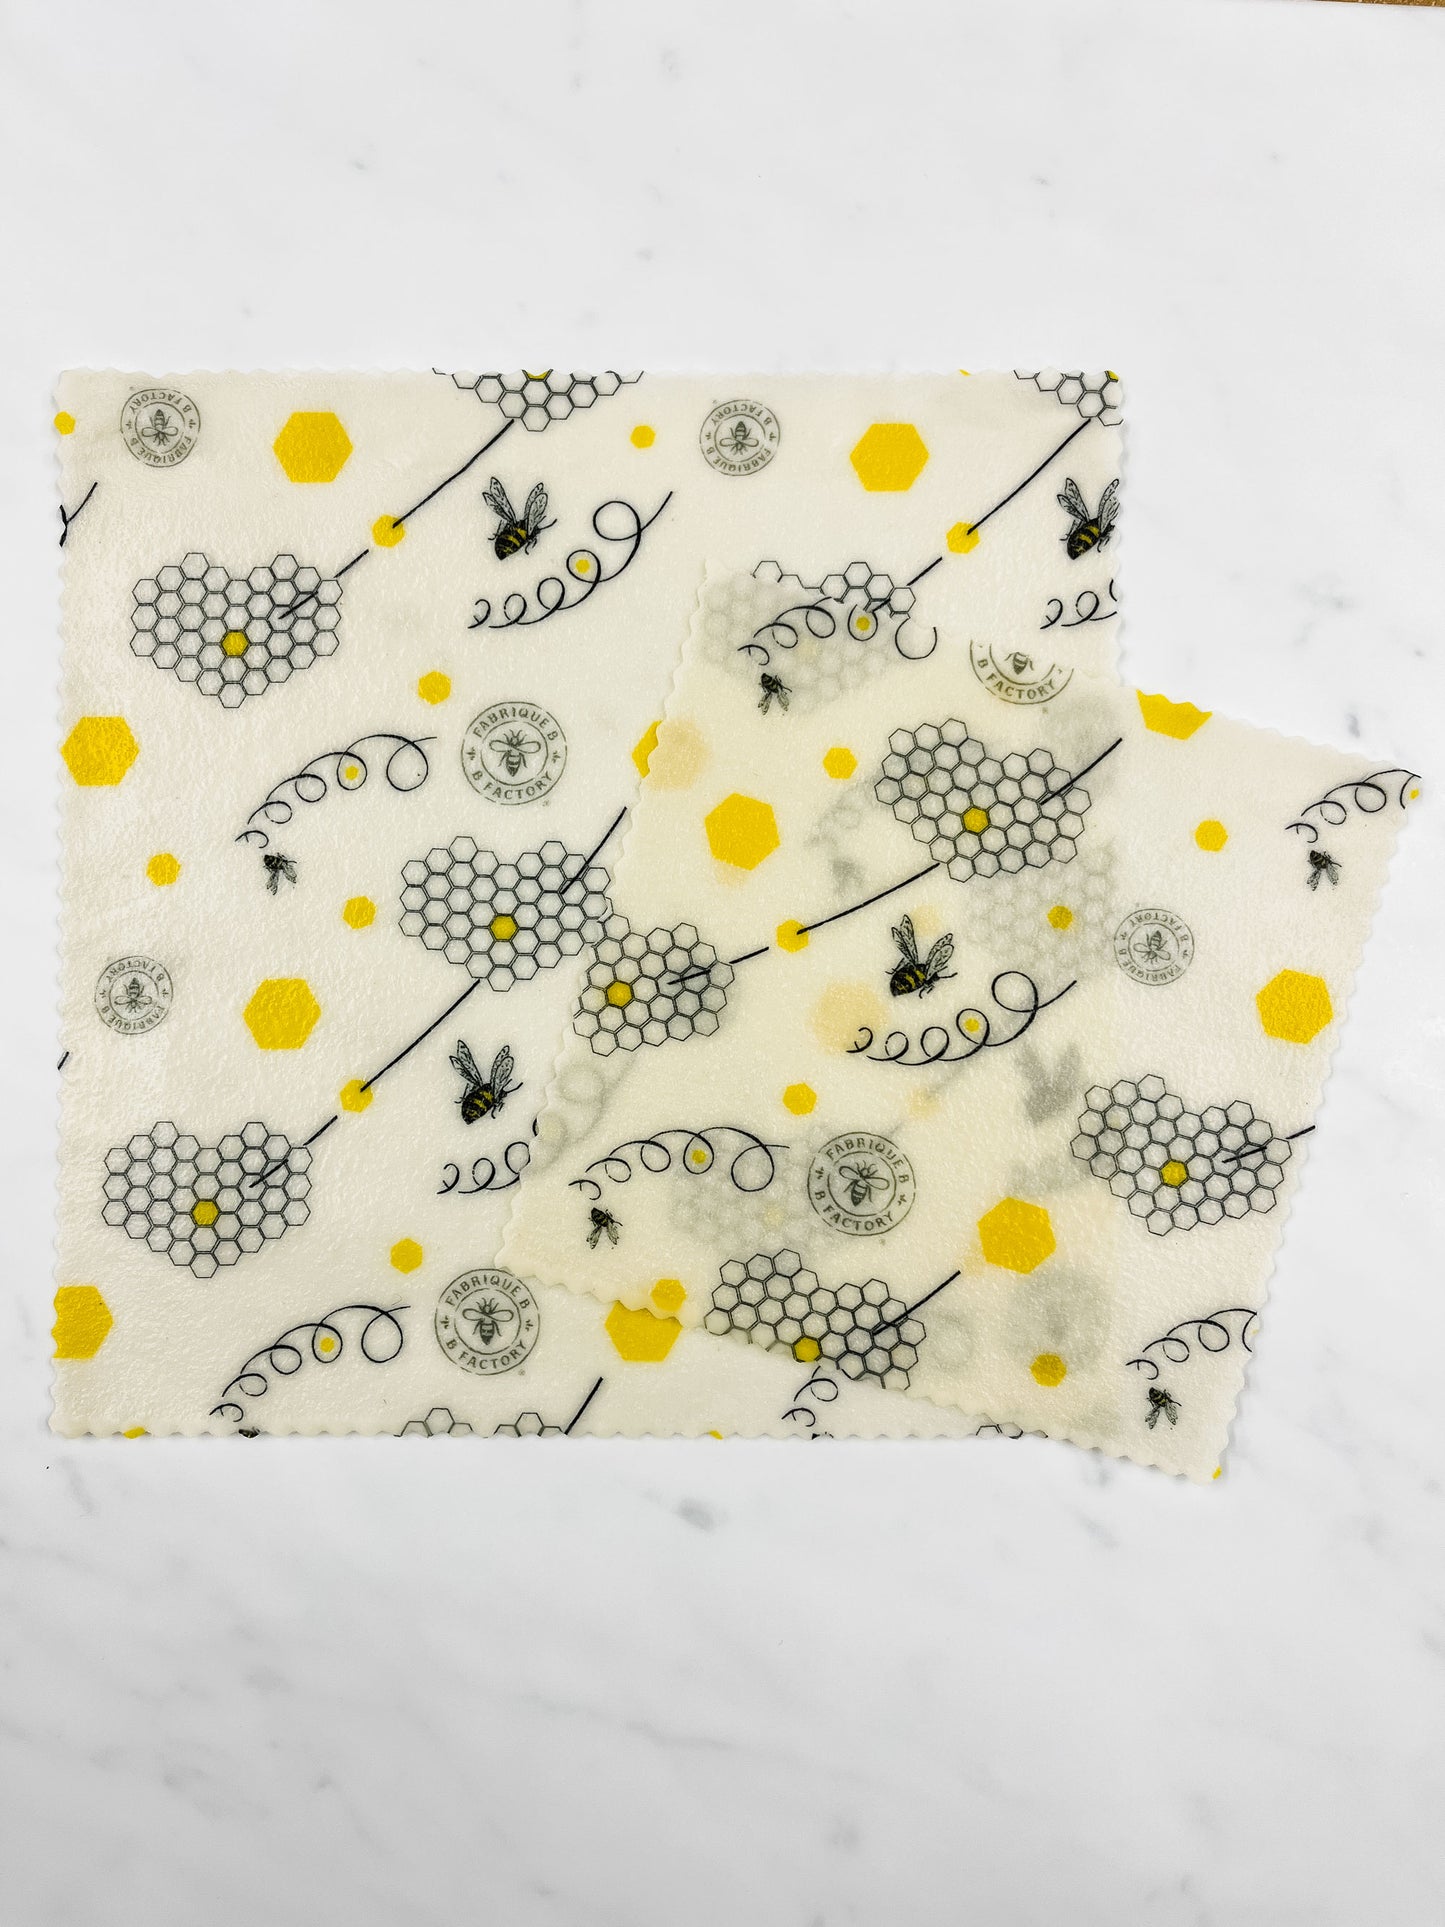 Pack of 2 square beeswax food wraps with honeycomb pattern, 1 medium beeswax wrap, 1 small beeswax wrap